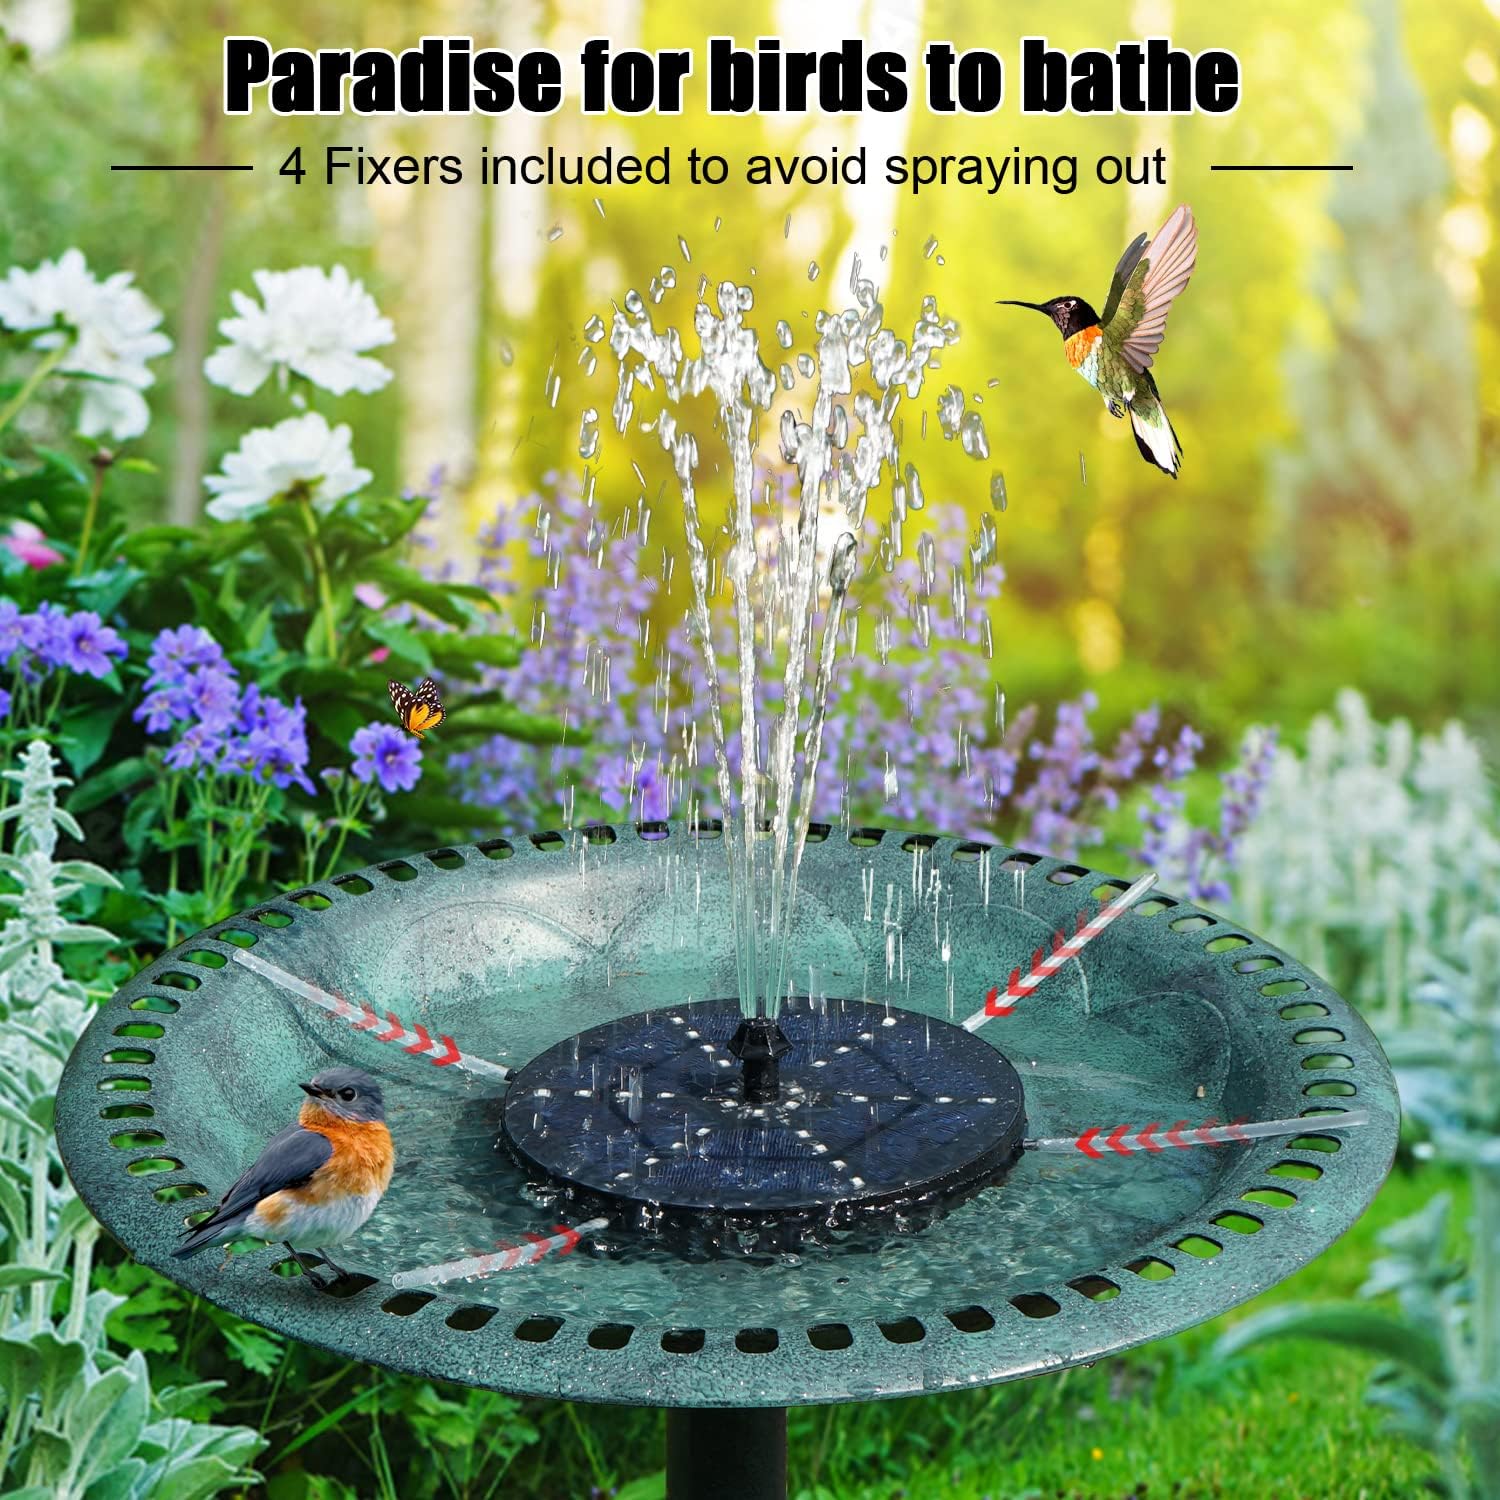 Solar Bird Bath Fountains 2024 Upgraded, 4W Solar Powered Water Fountain Pump with 4000 Battery, 7 Nozzles  4 Fixers, Colorful LED Lights for Garden, Swimming Pool, Pond, and Outdoor Decor